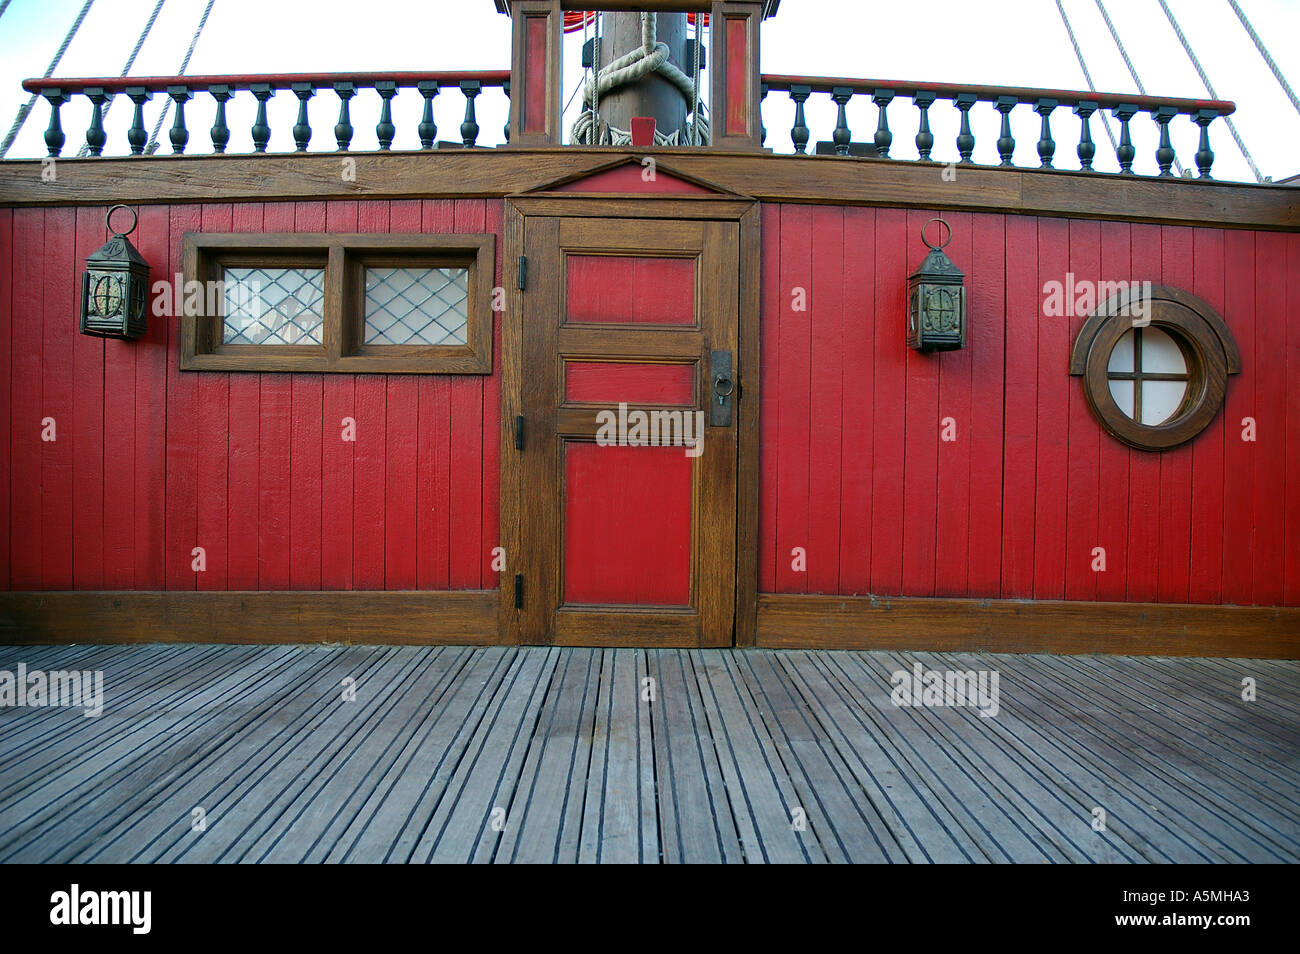 RAJ98806 Old Ship in Museum showing wall red color with door and windows PARIS France Europe Stock Photo